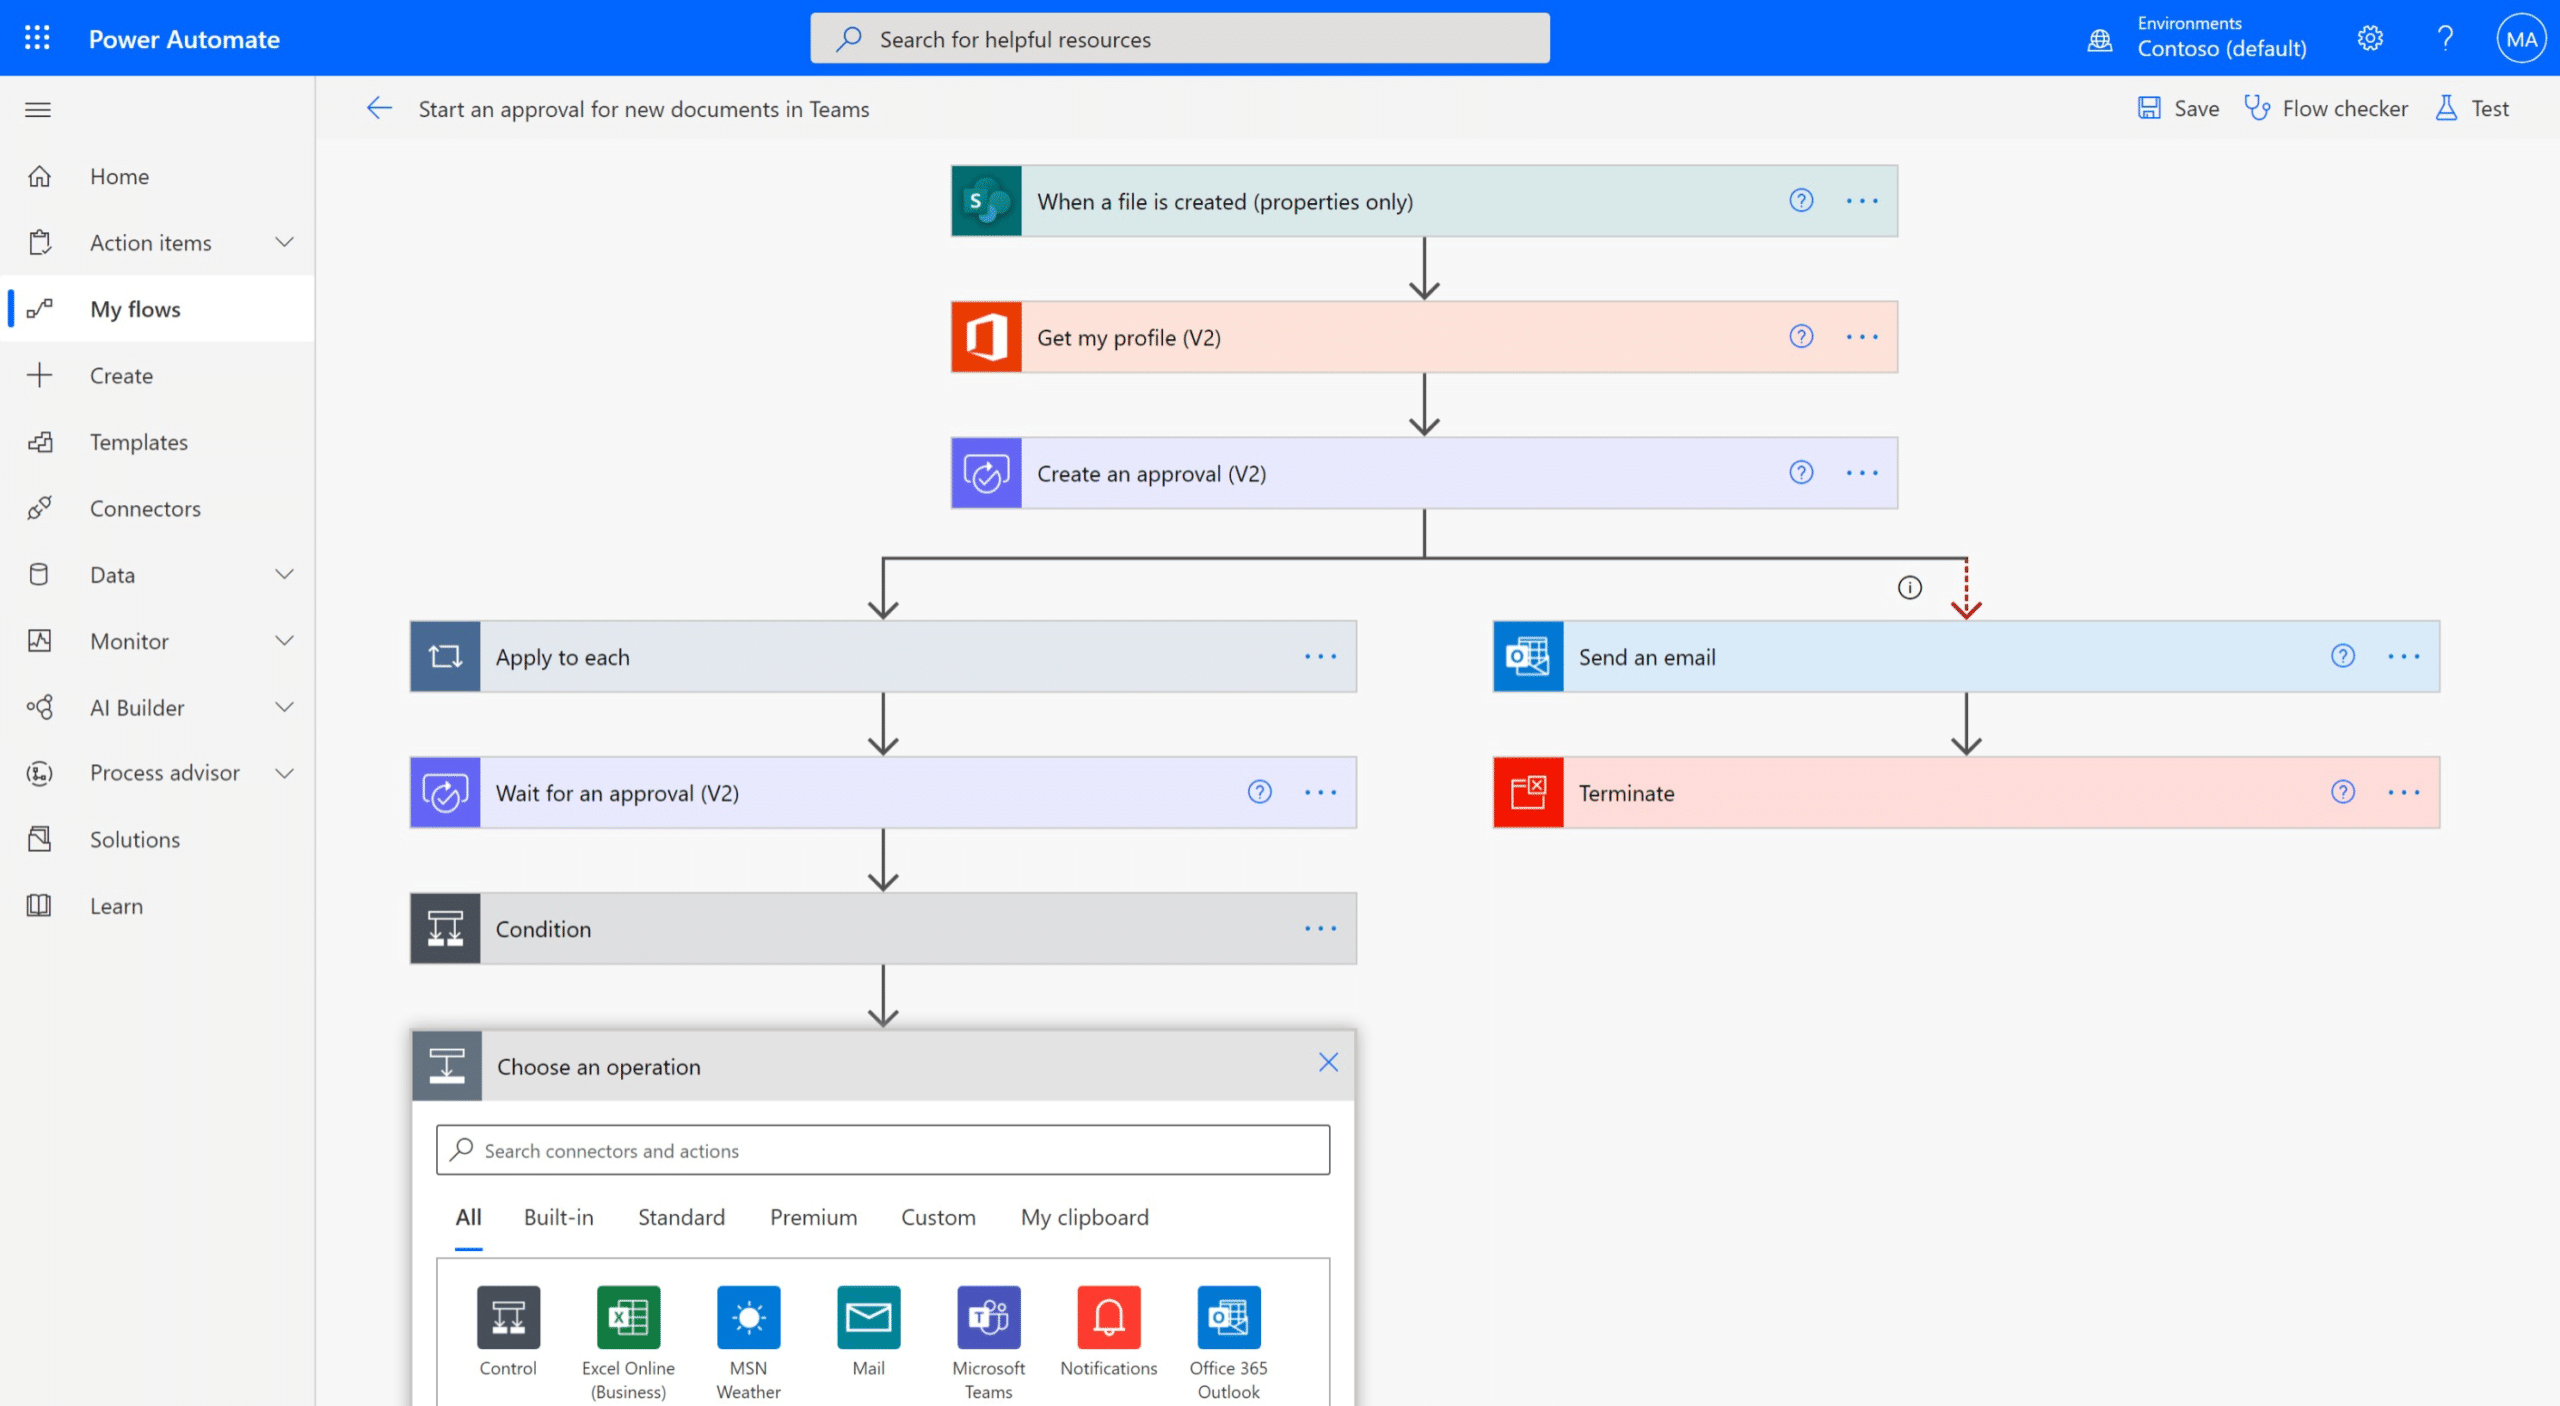 Cloud flows allow you to automate workflows between modern (API) cloud-based services. Using digital process automation (DPA), cloud flows empower anyone to build robust automation with hundreds of connectors. Create cloud flows with ease using the logic-based designer and see your automations come alive.